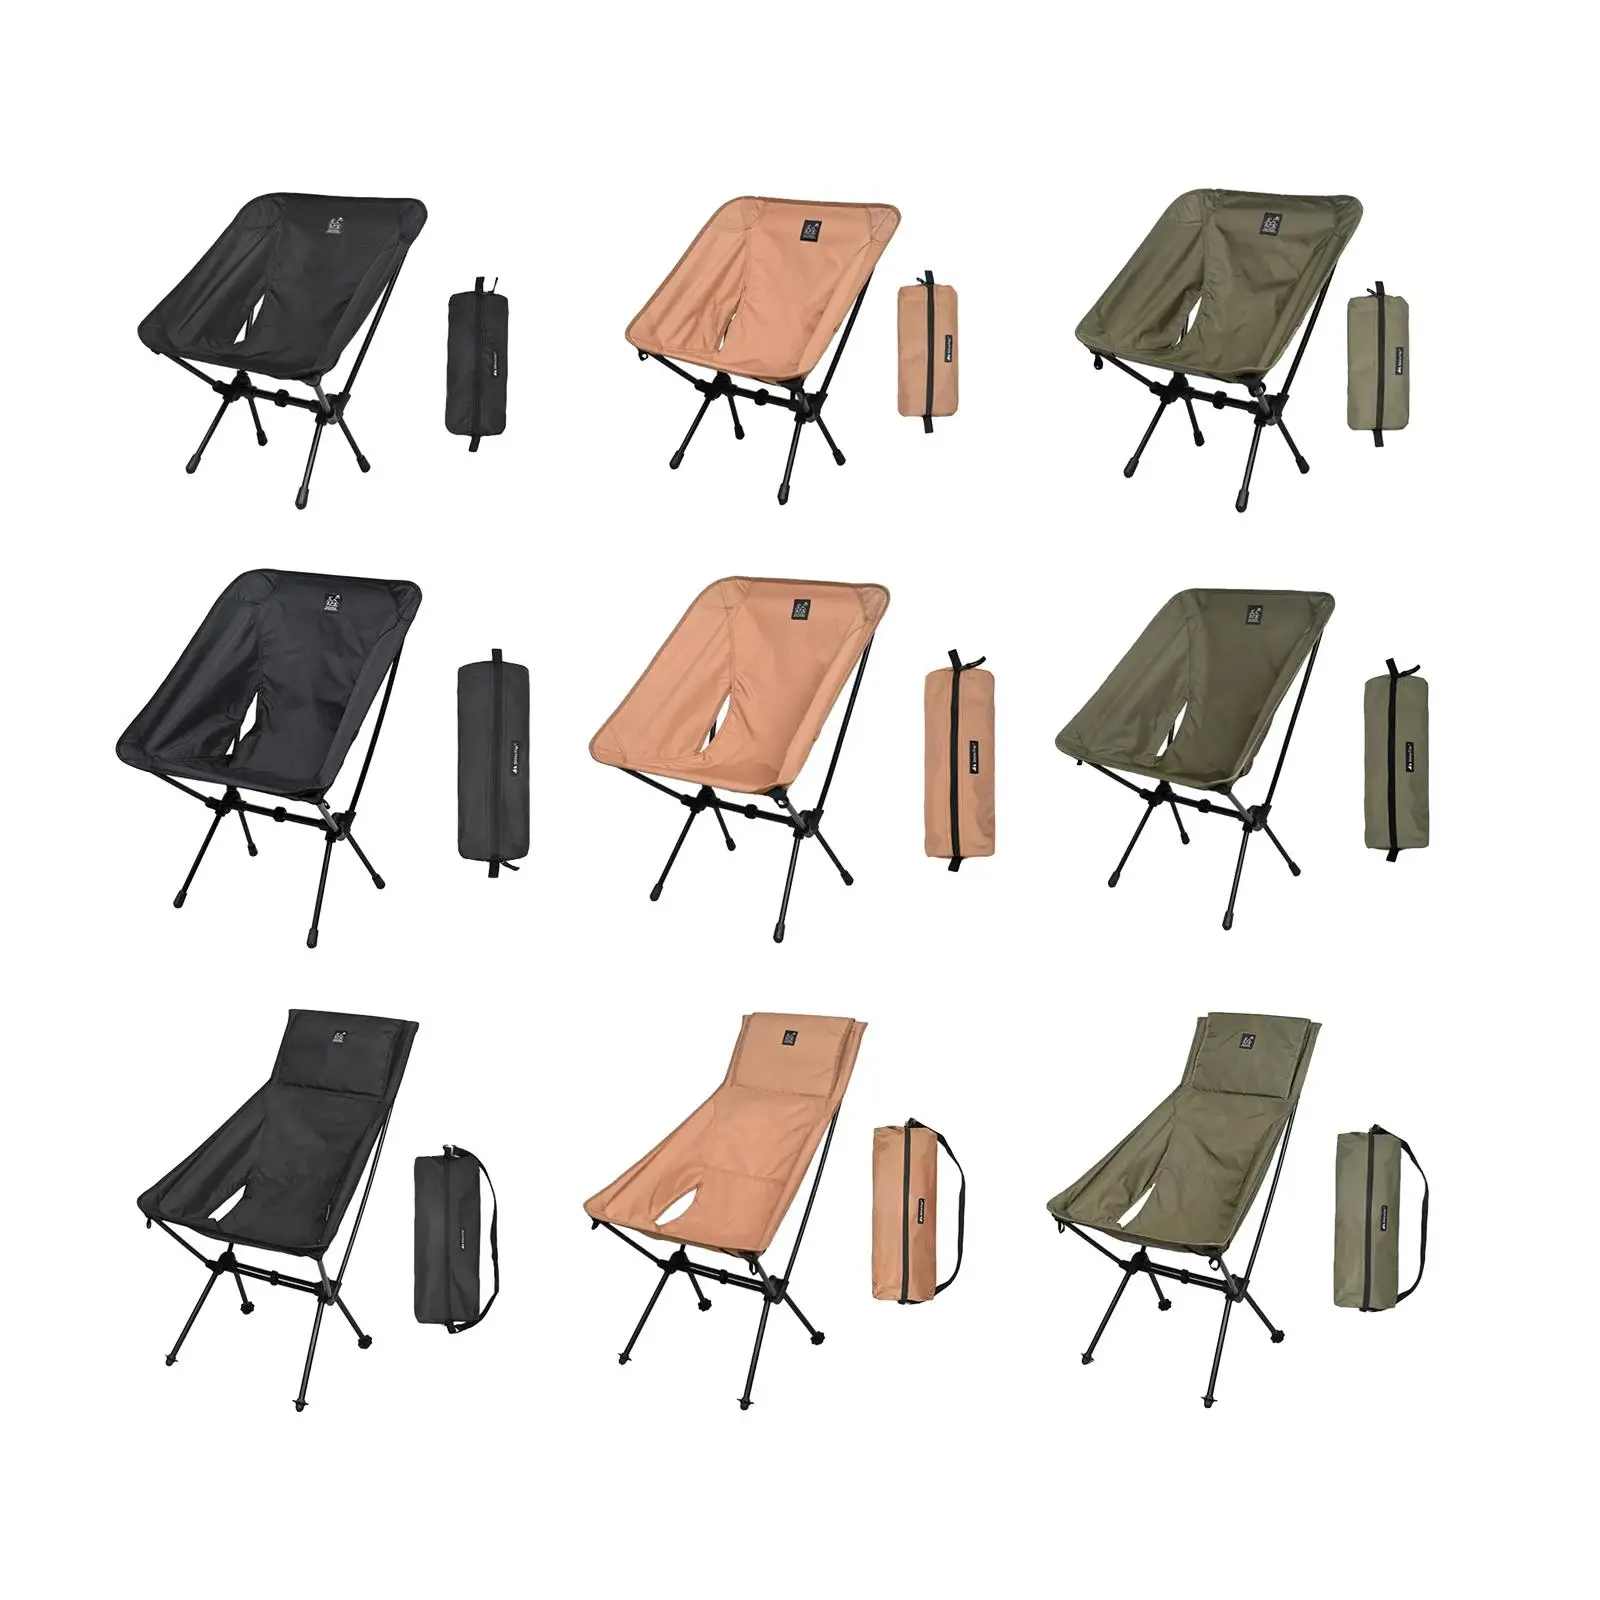 Heavy Duty Outdoor Camping Armchair W/Storage Pouch Seat Portable Folding Moon Chair for Backyard Barbecue Beach Fishing Picnic